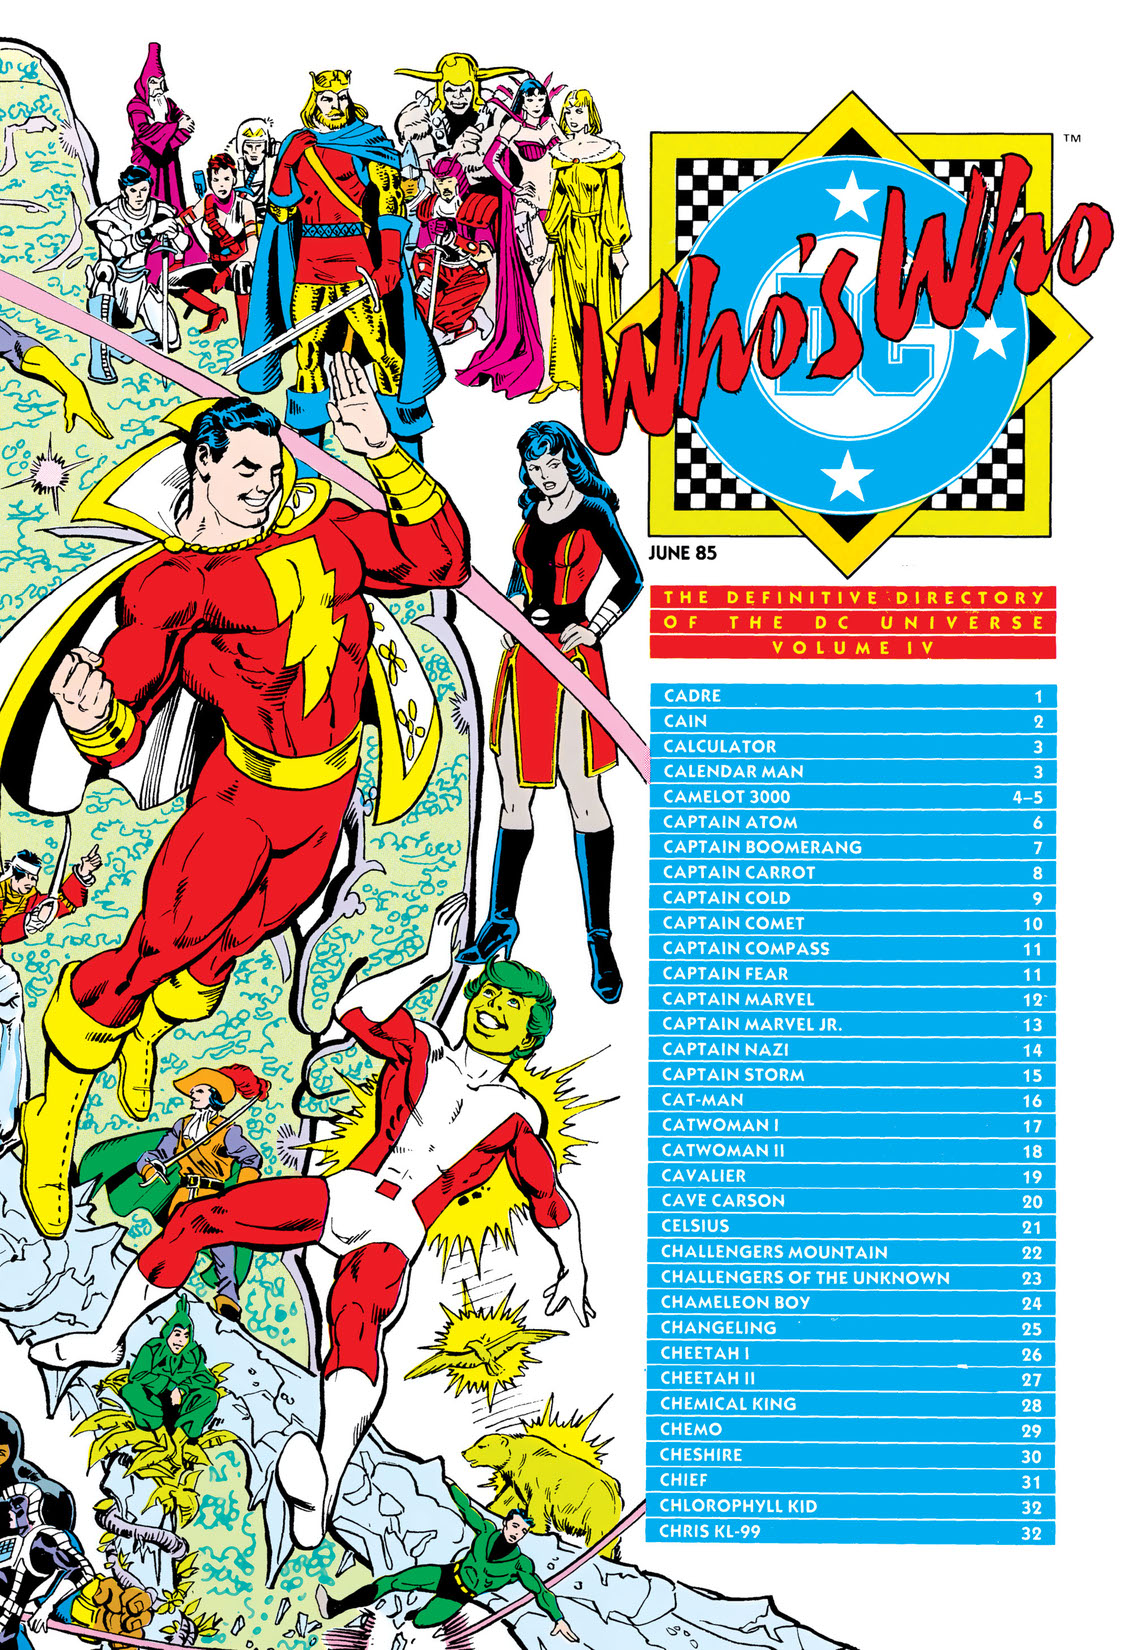 Who's Who: The Definitive Directory of the DC Universe #4 preview images